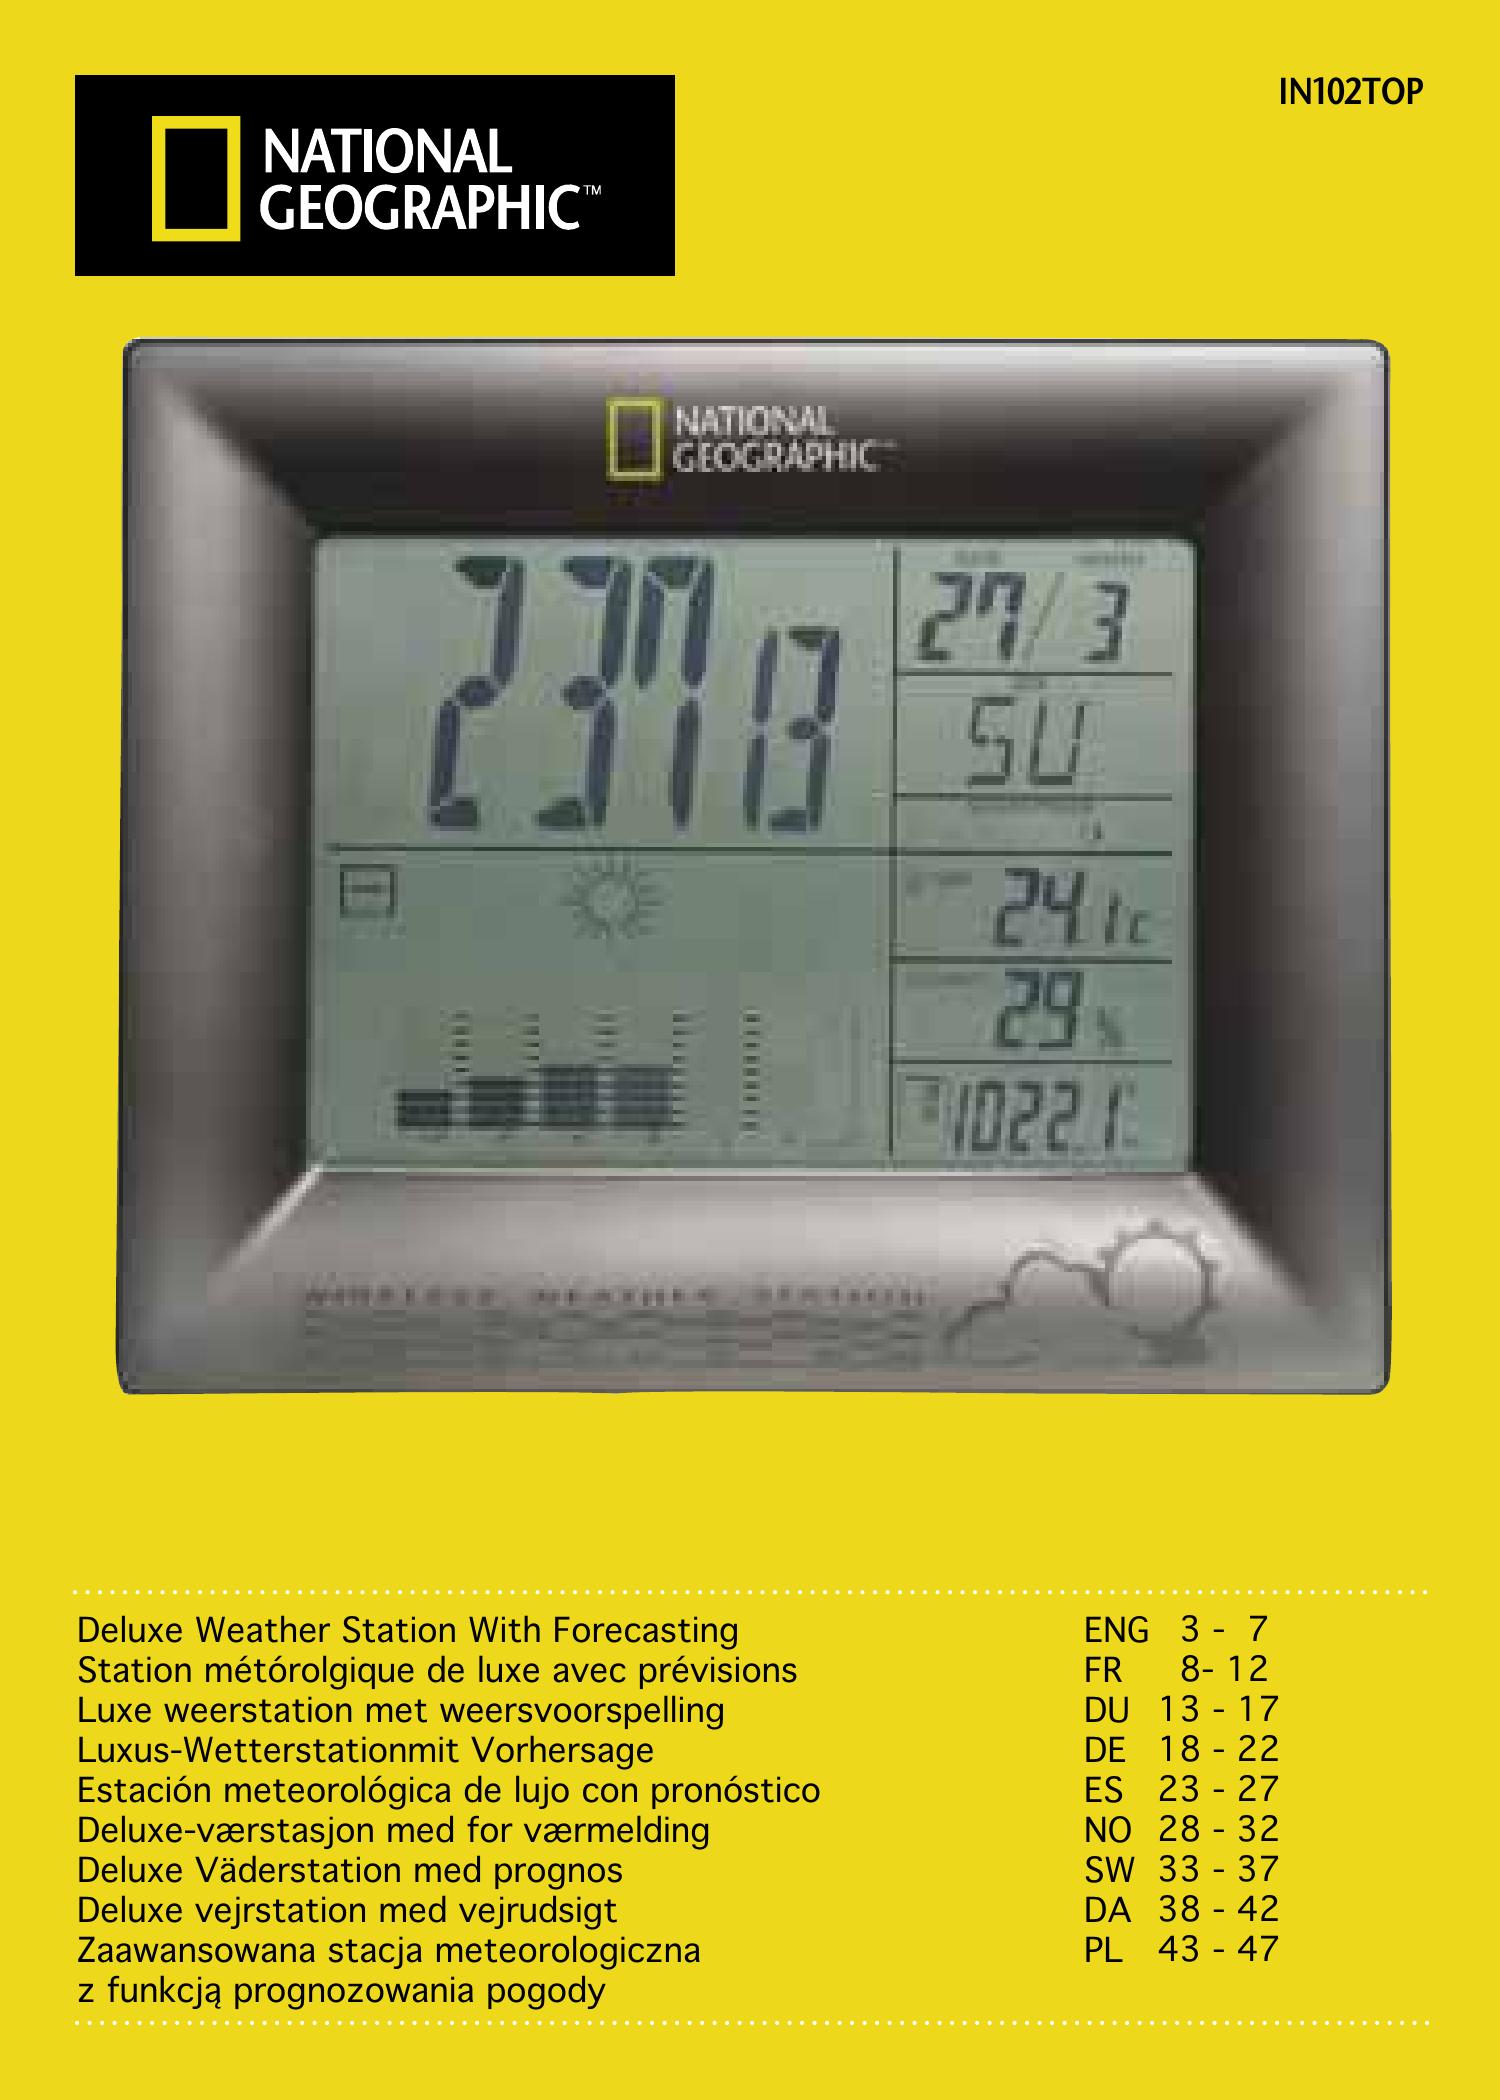 National Geographic IN102TOP Weather Radio User Manual